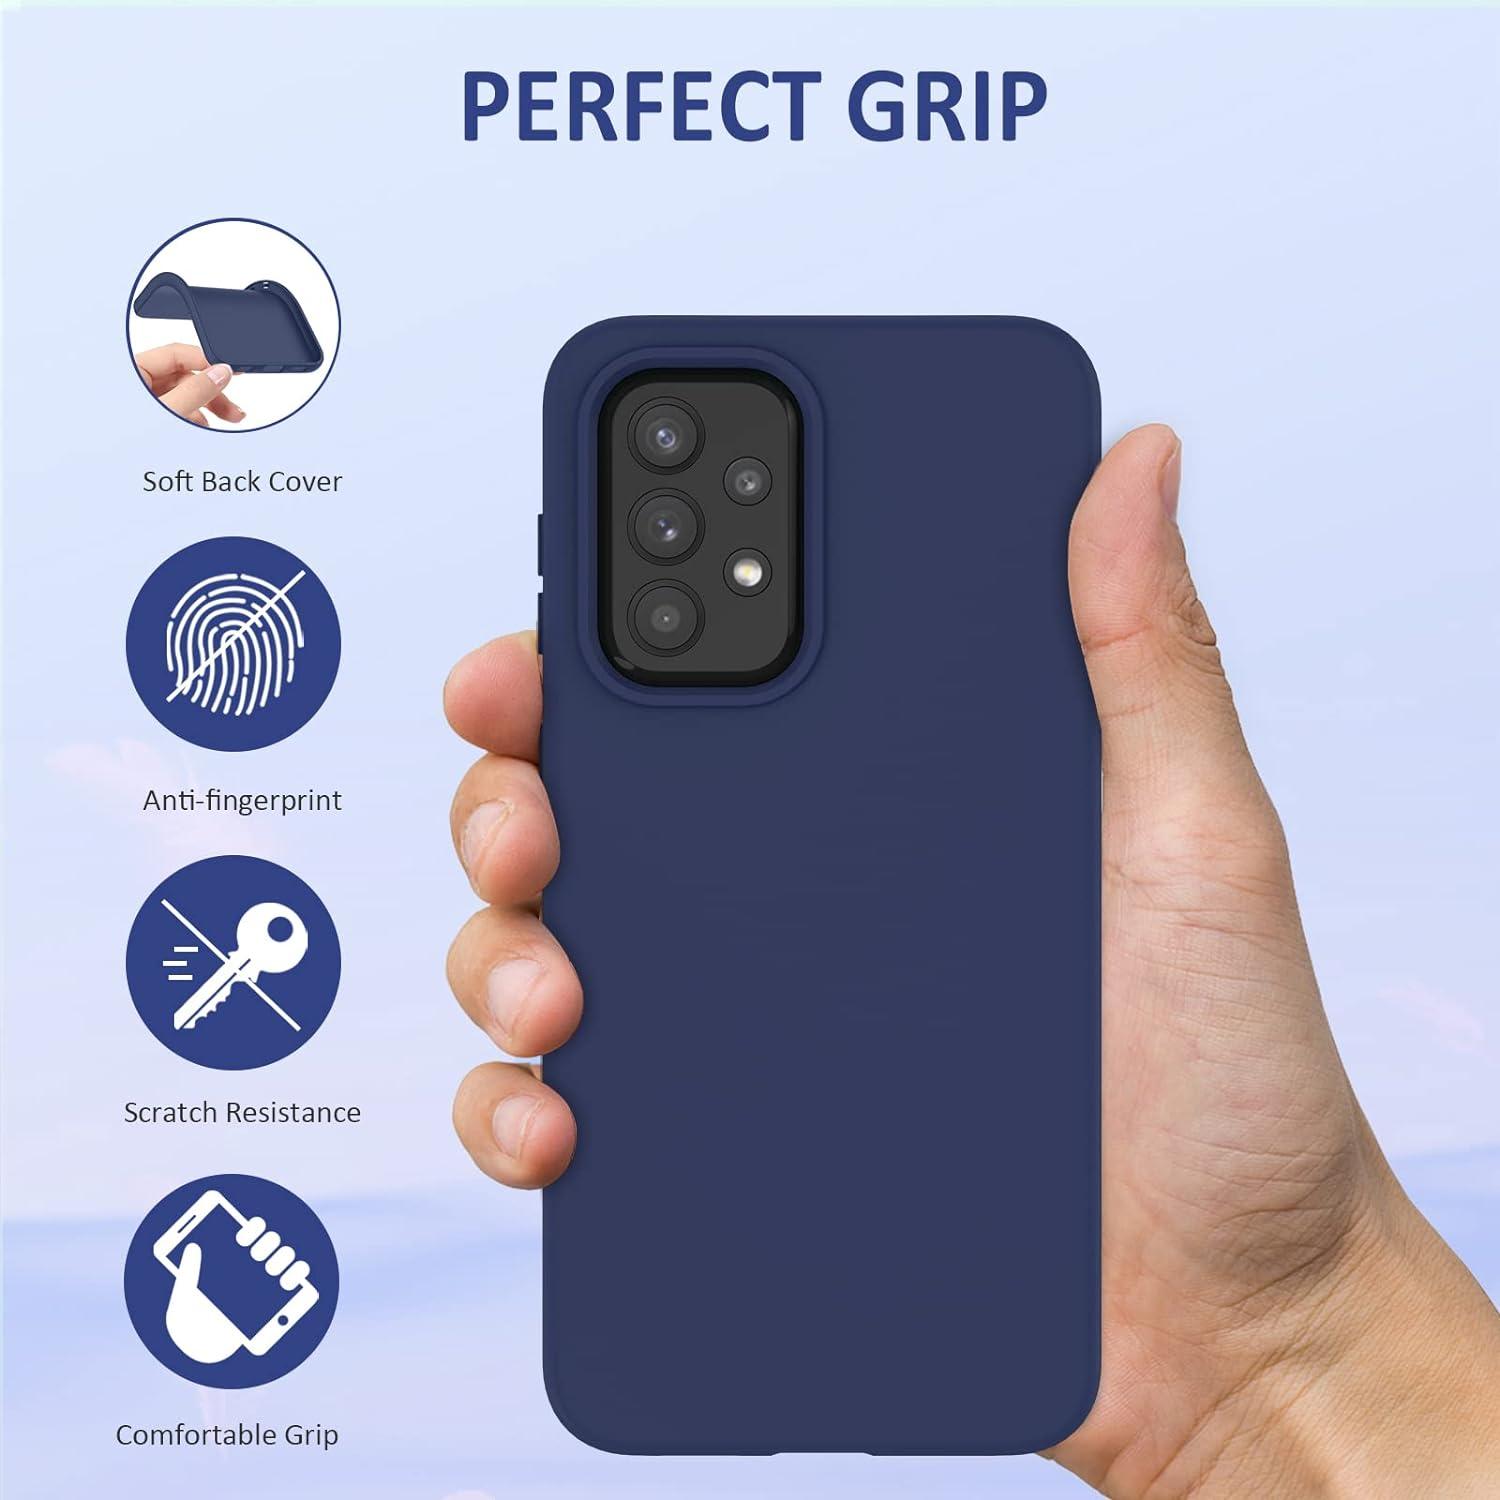 Galaxy A33 5G Case: TPU Silicone Drop Protection Slim Rugged Case